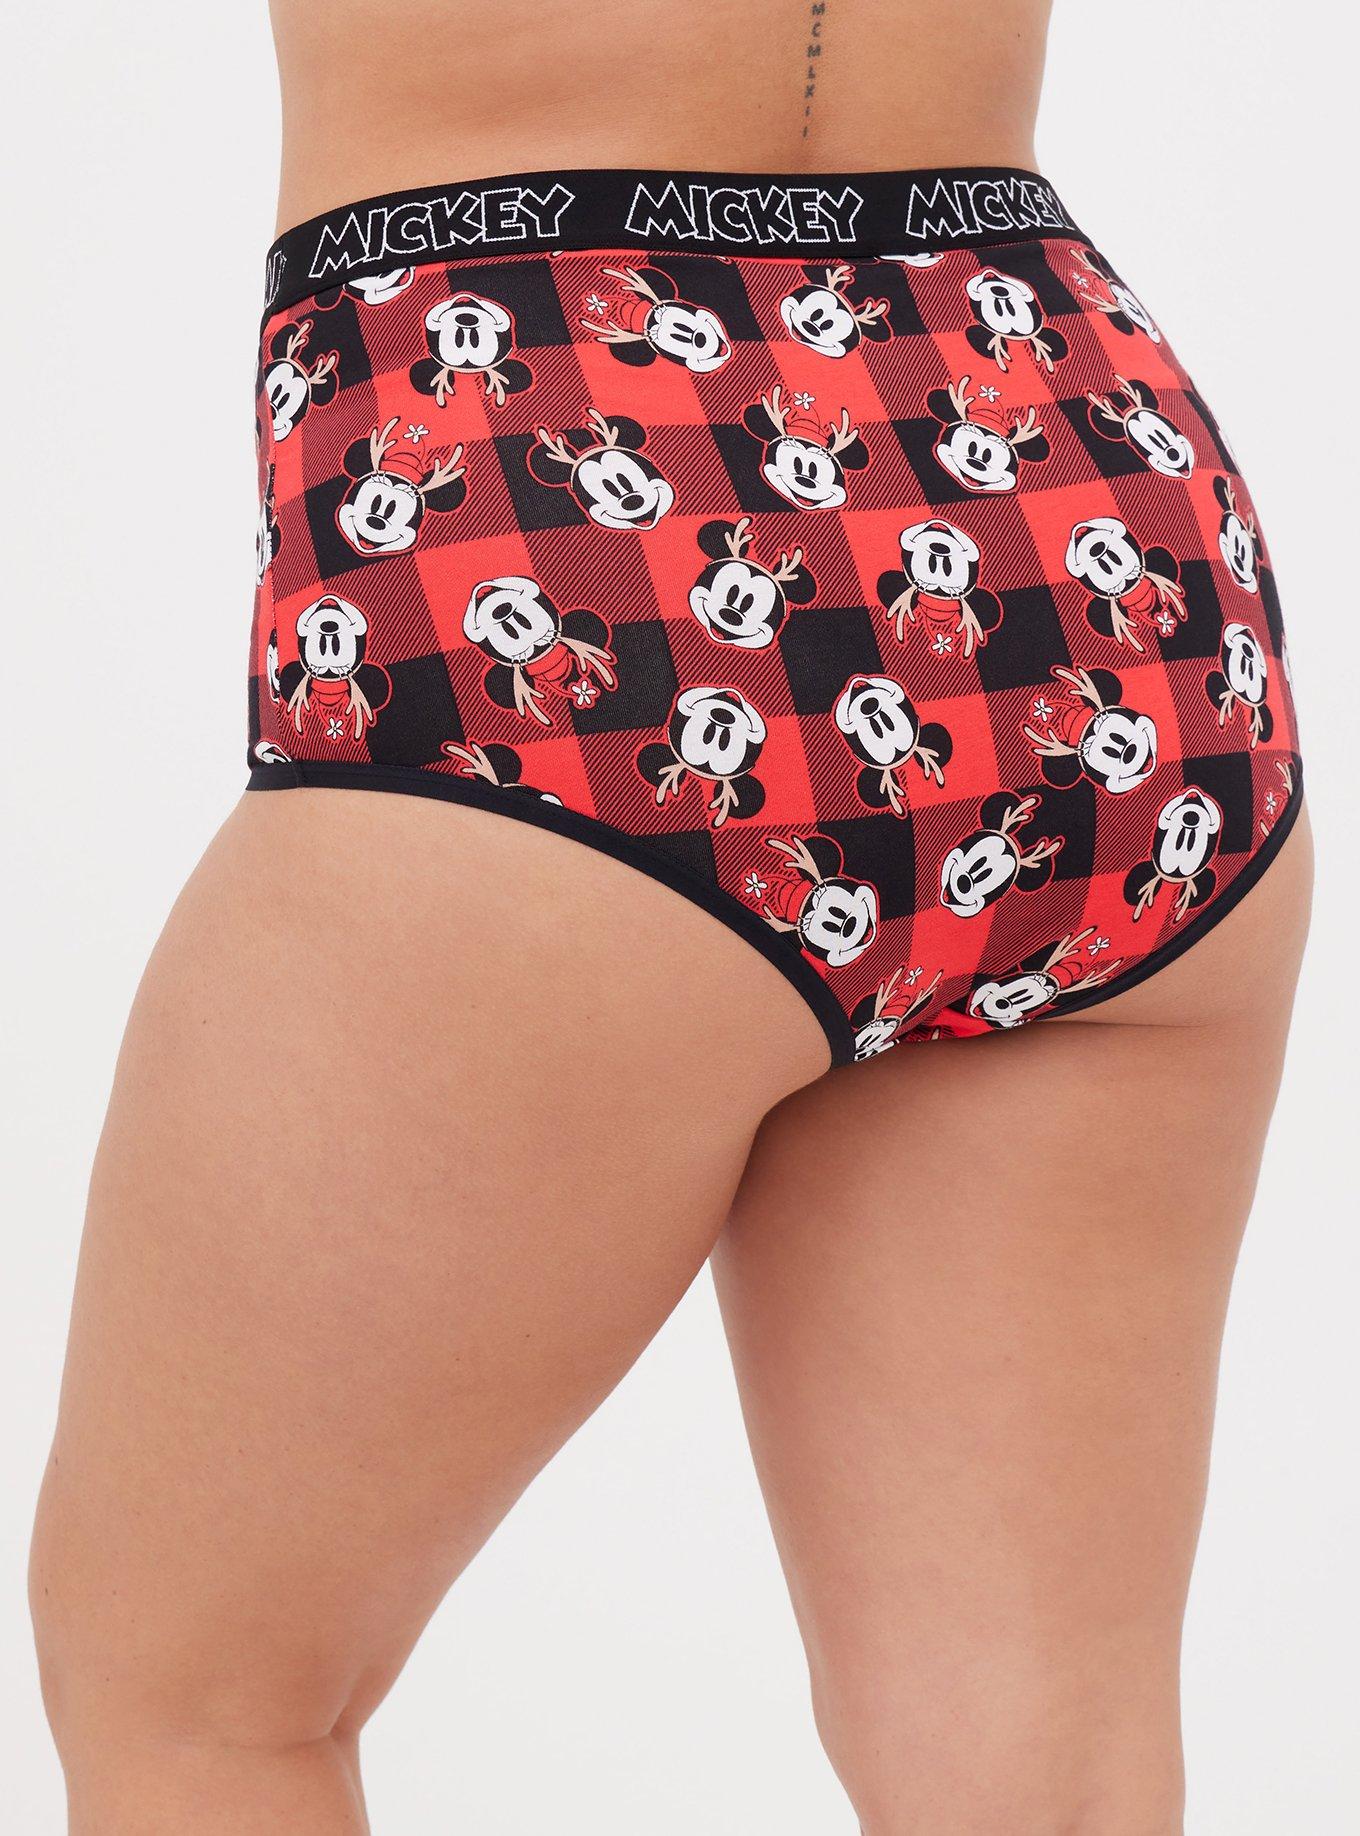 Disney Mickey Mouse Panties for Women